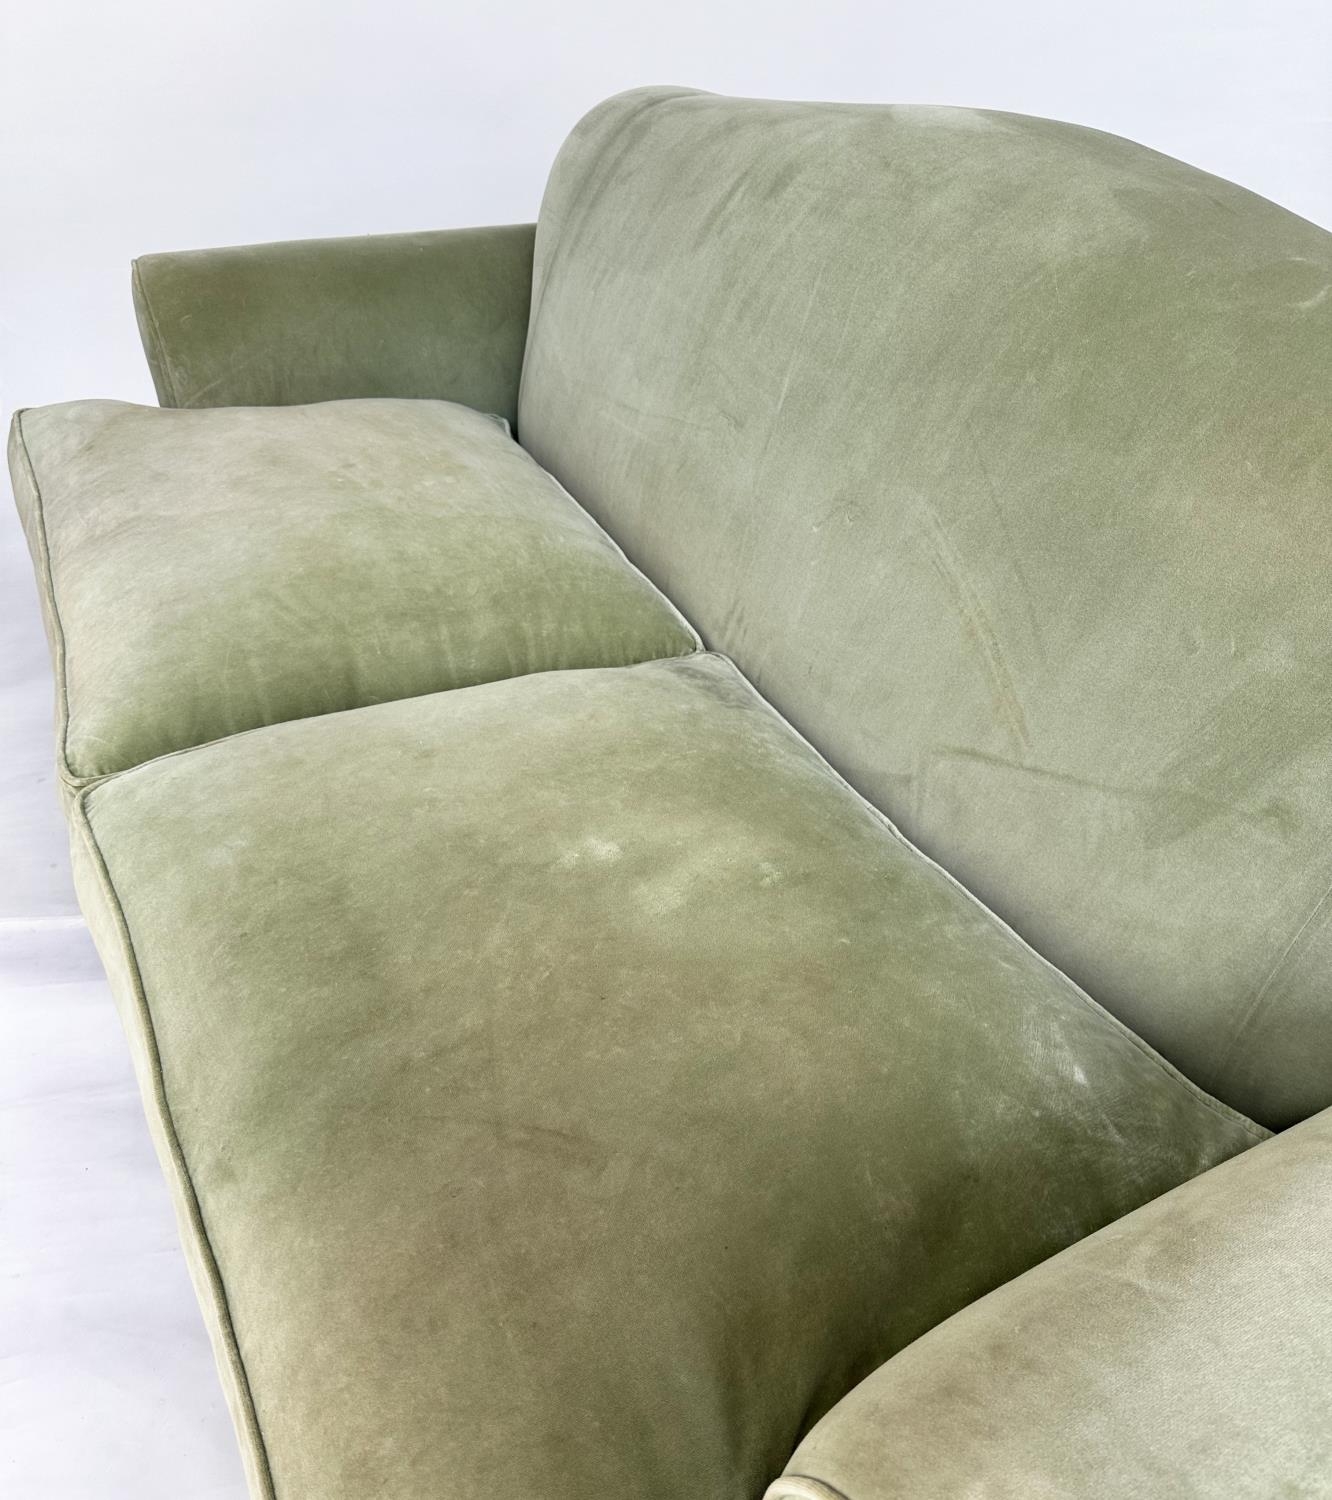 SOFA, Howard style possibly George Smith with green velvet upholstery, feather filled cushions and - Image 3 of 3